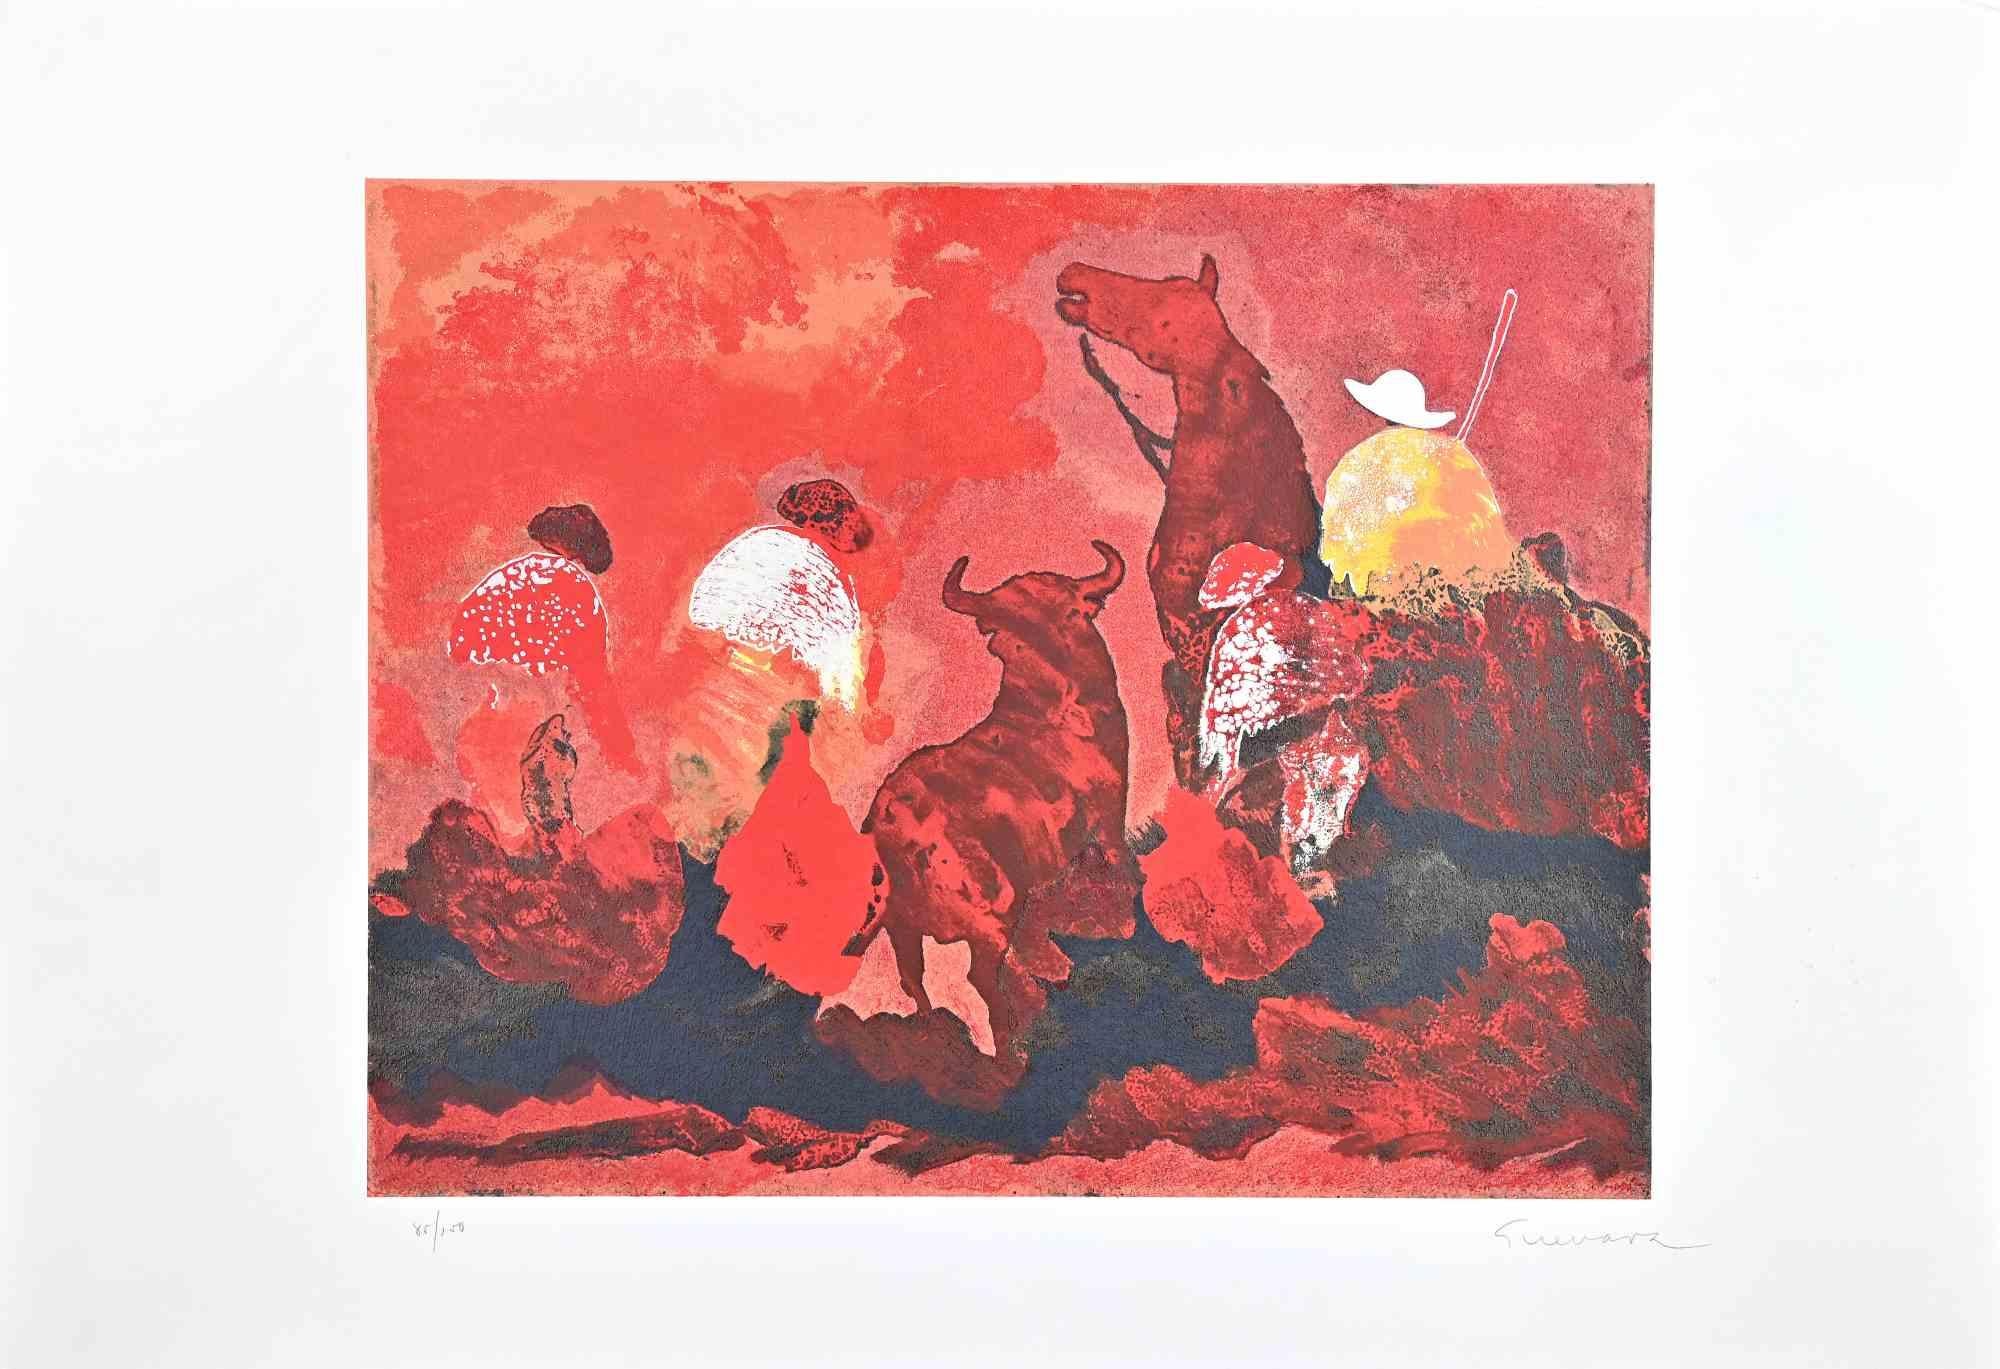 Bullfight In Red  is a very colorful artwork realized by Josè Guevara in 1989 .

Serigraph  on paper.

The print is hand-signed in pencil on the lower left. Numbered on the lower right. Edition XLV/L.

Good conditions.

The artwork shows one of the